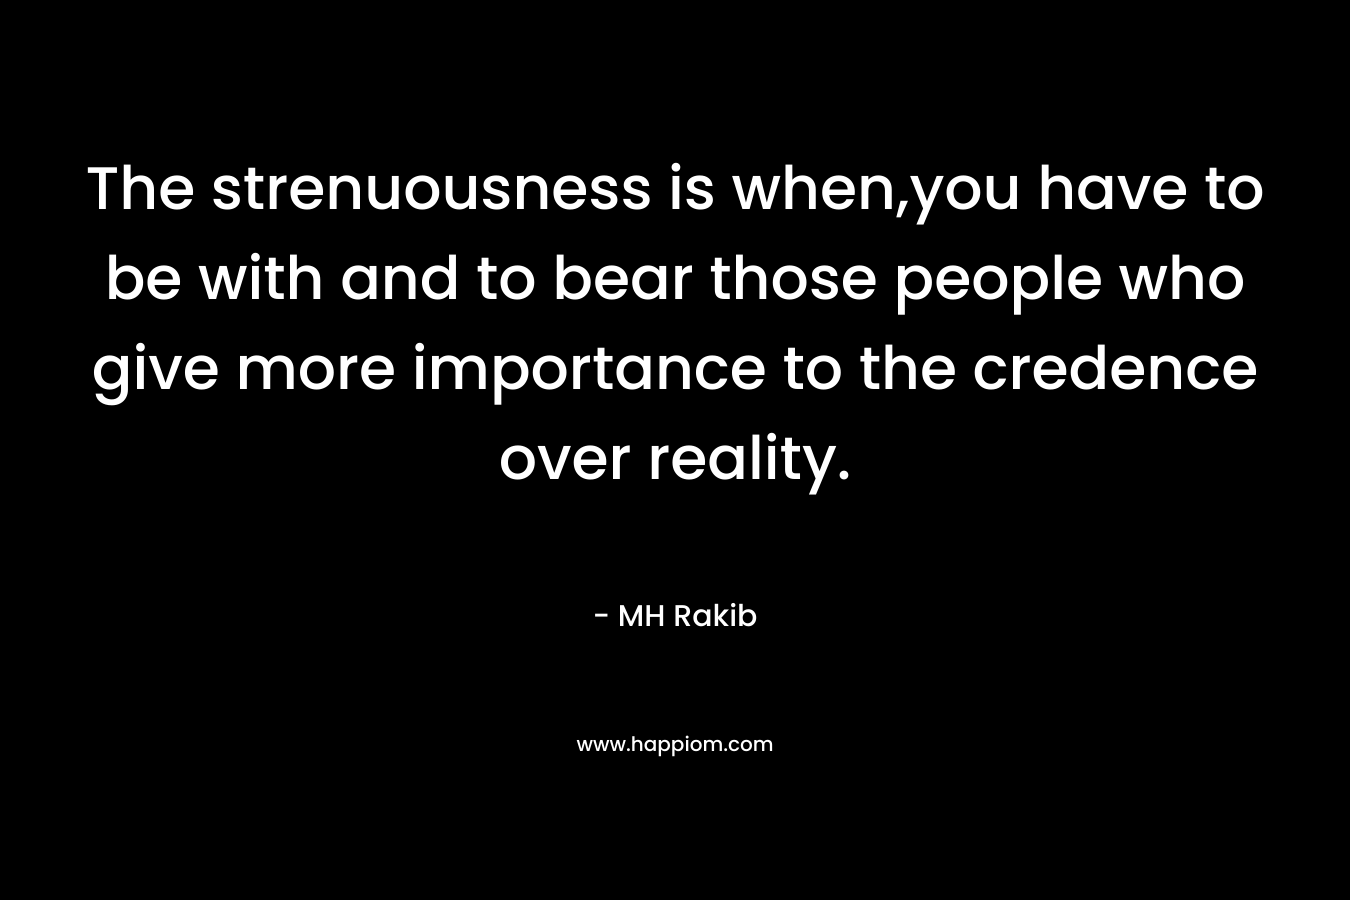 The strenuousness is when,you have to be with and to bear those people who give more importance to the credence over reality.